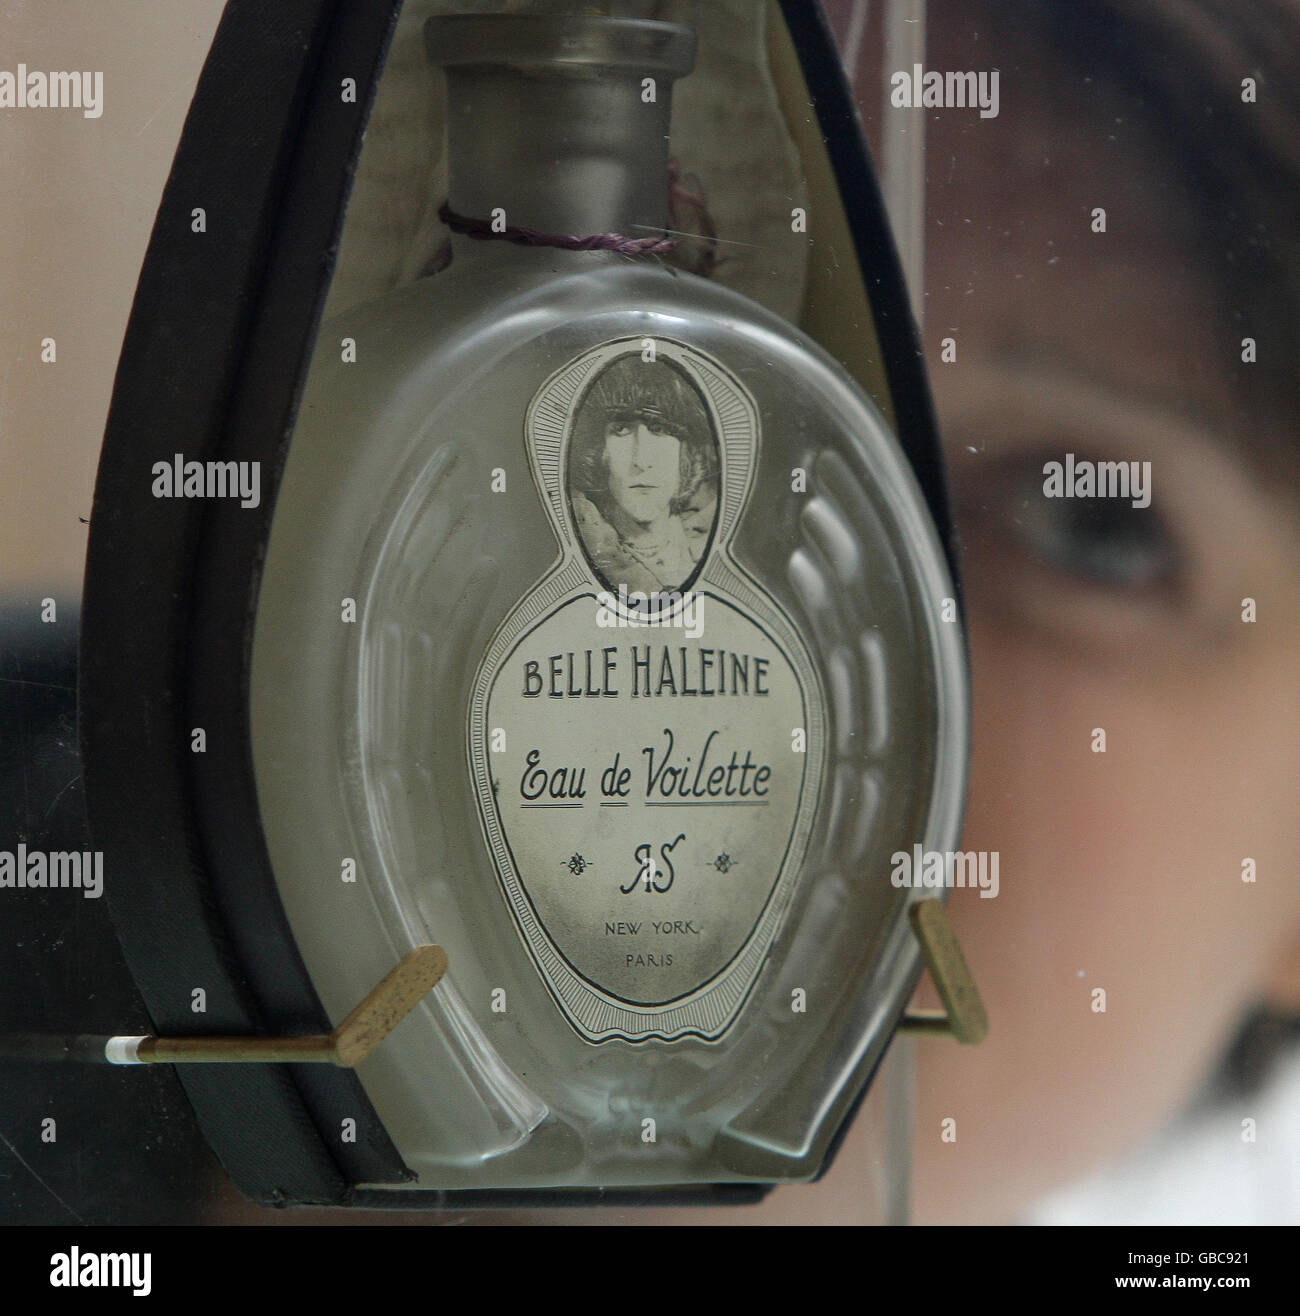 A member of staff at Christies auction house, London with 'Belle haleine - Eau de voilette' by Marcel Duchamp, valued at 1,000,000 to 1,500,000 Euros, as part of the exhibition of items from the collection of Yves Saint Laurent and Pierre Berge. Stock Photo